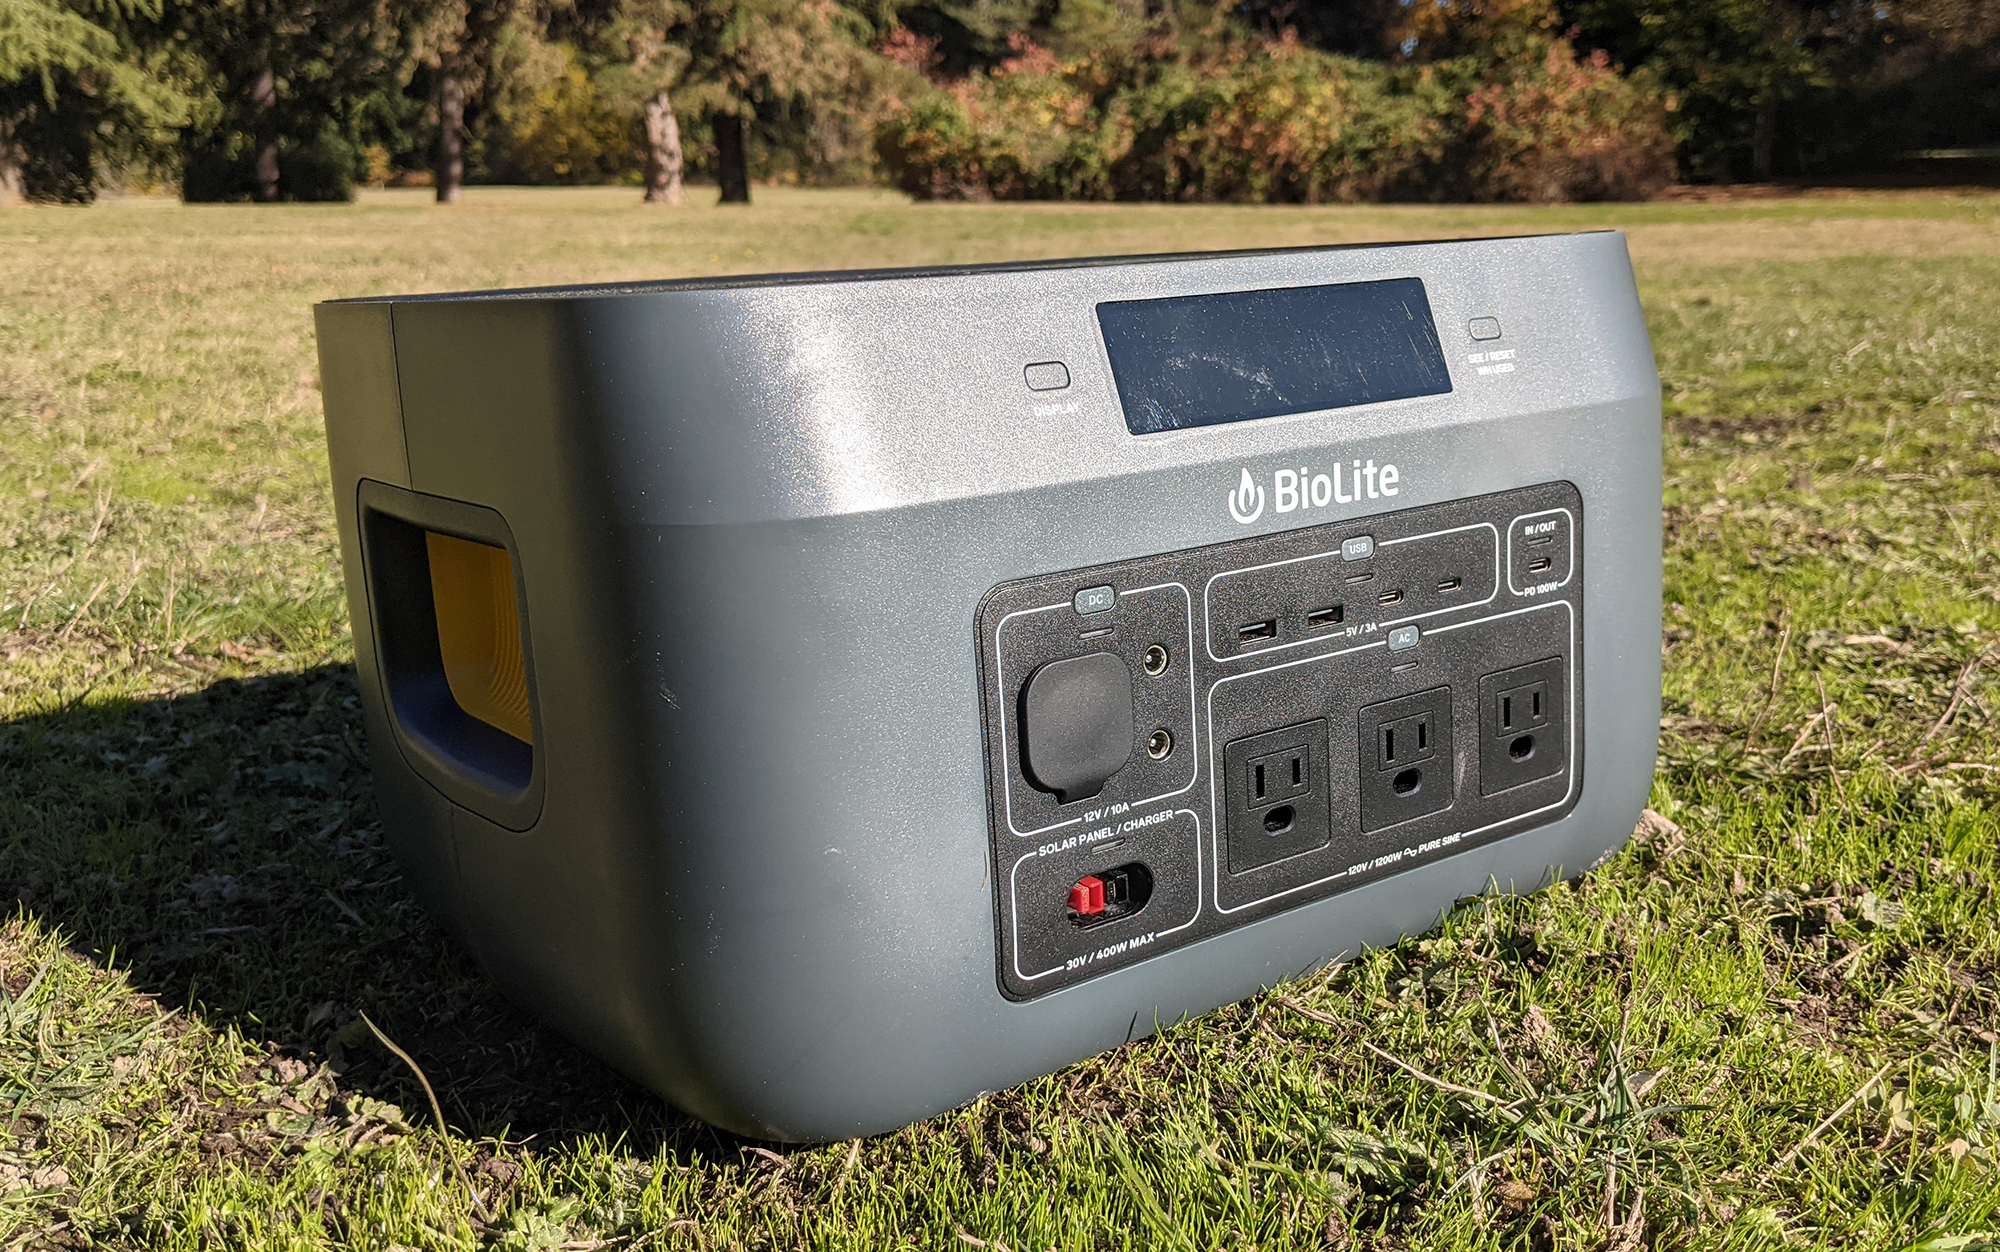 The Biolite 1500 sits in the grass.